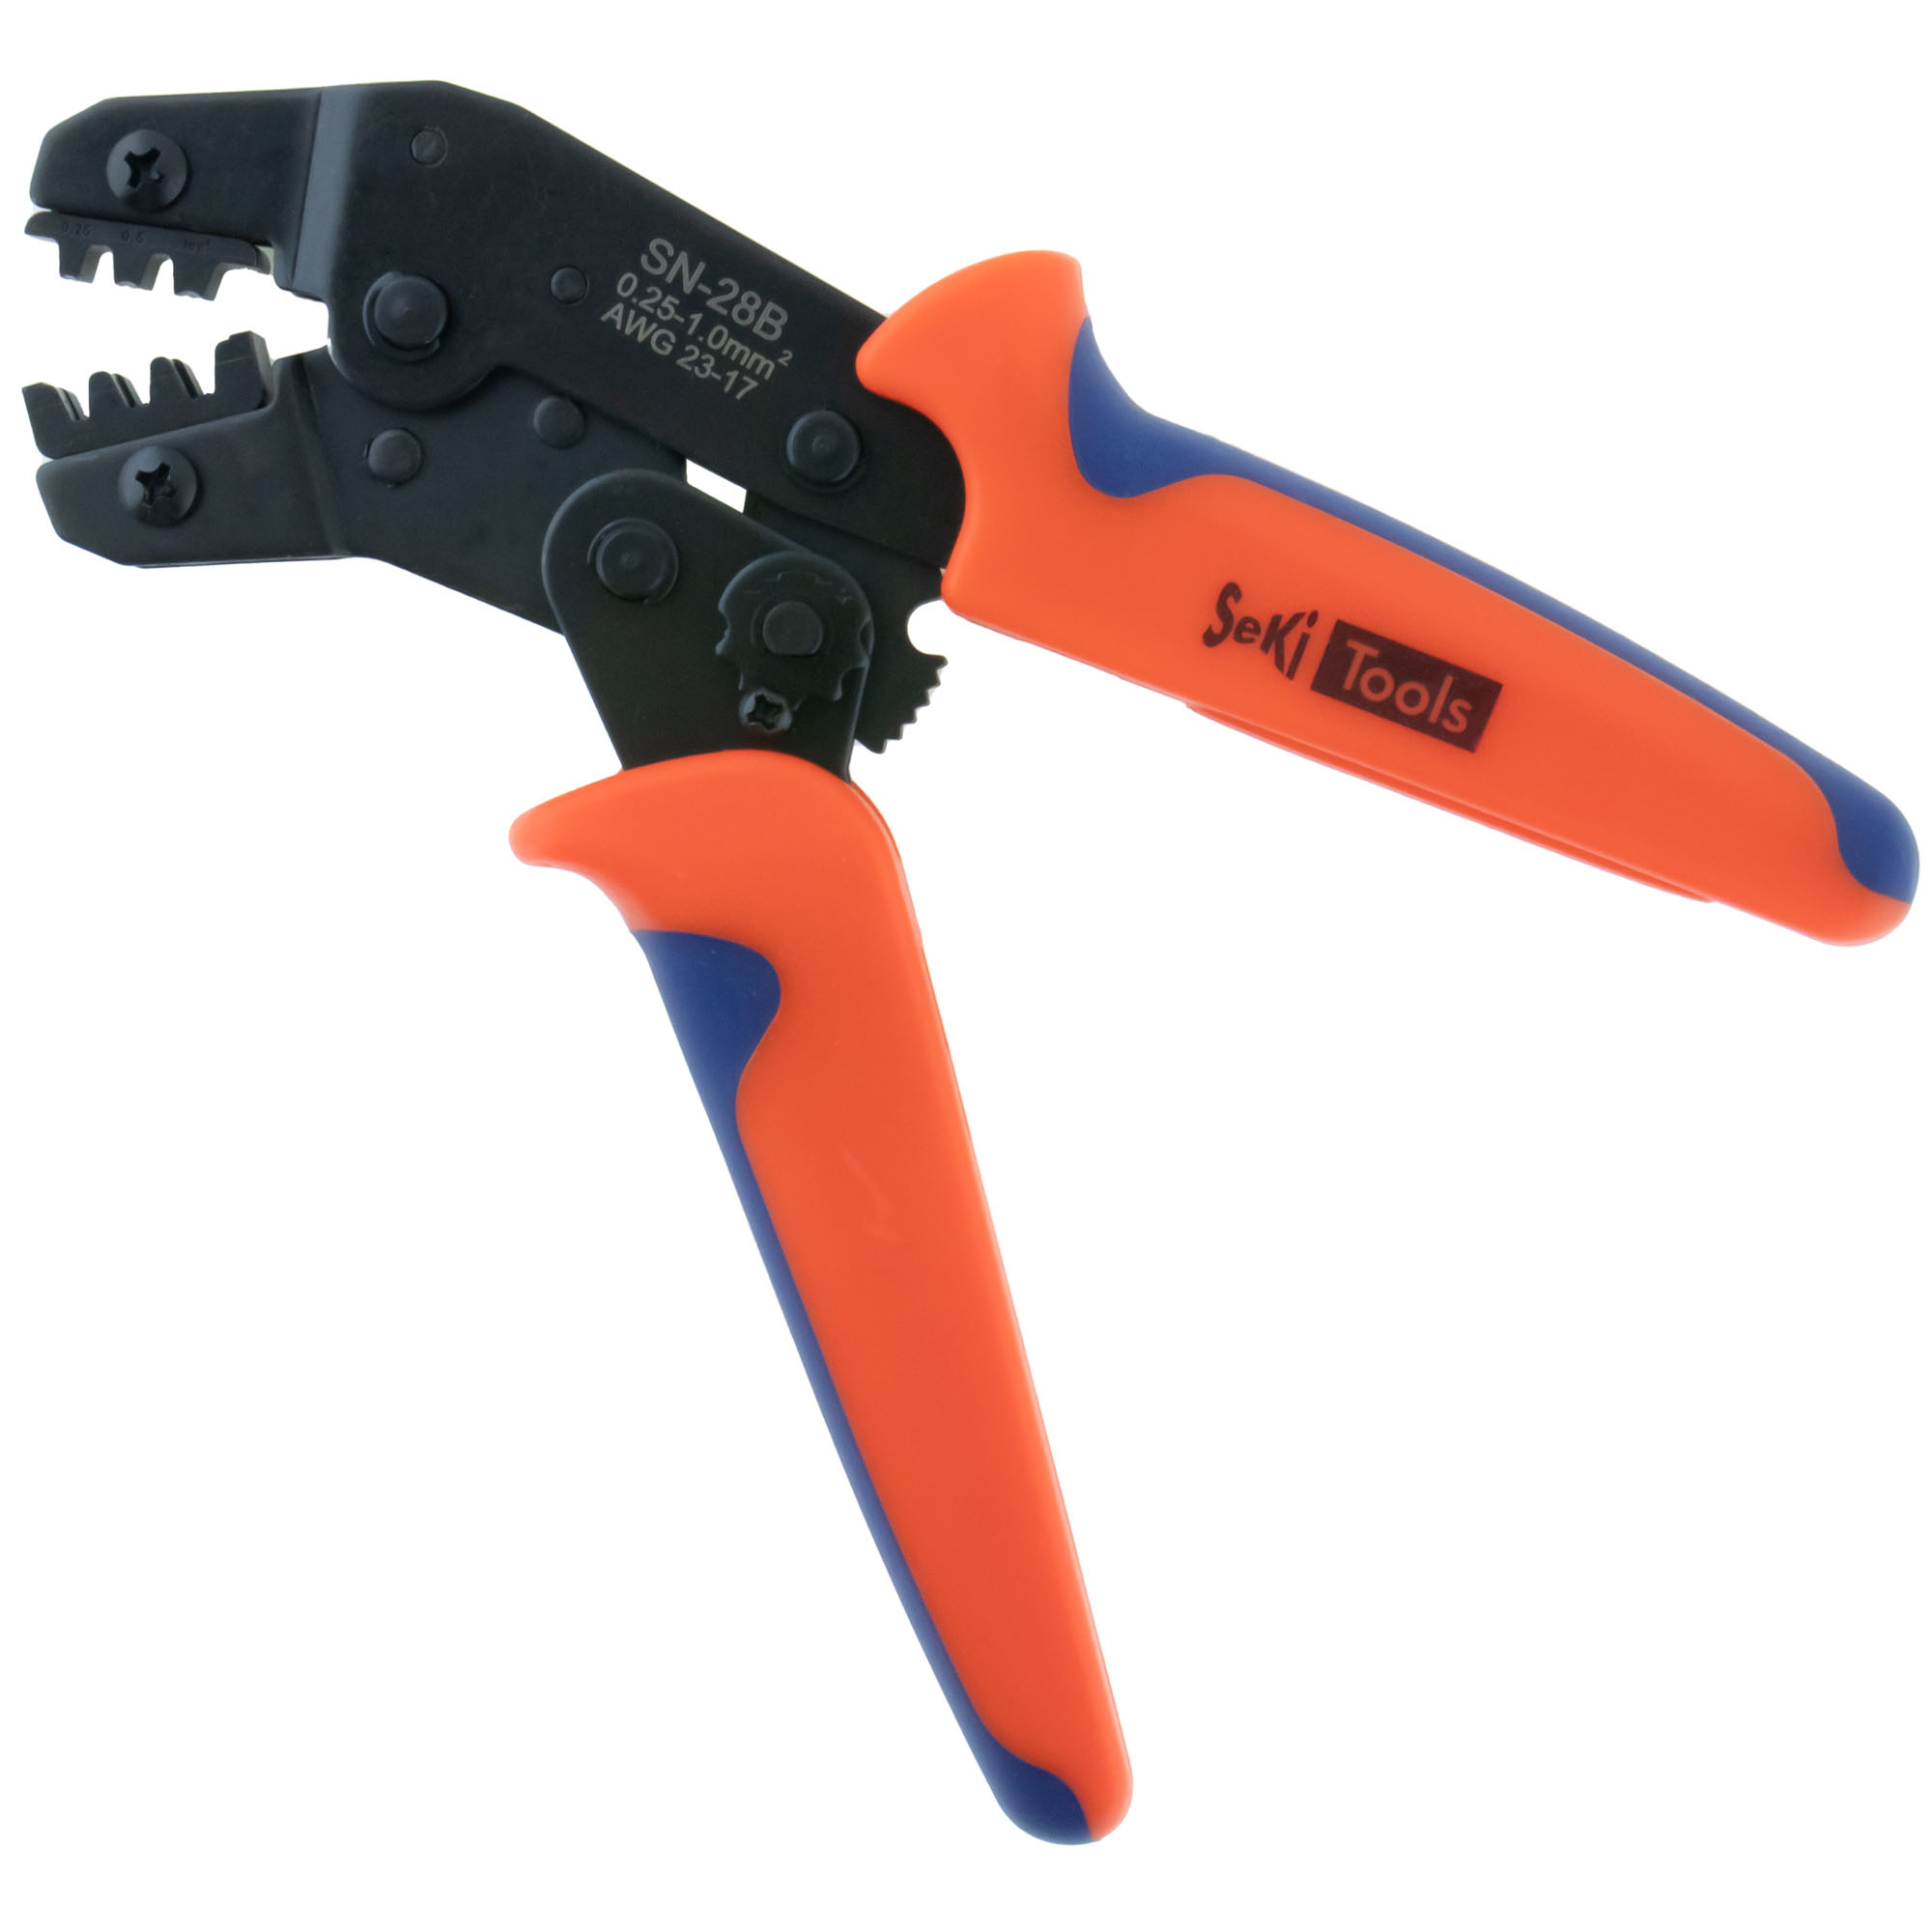 Crimping tool for Dupont-Terminals 0,25-1,0mm²